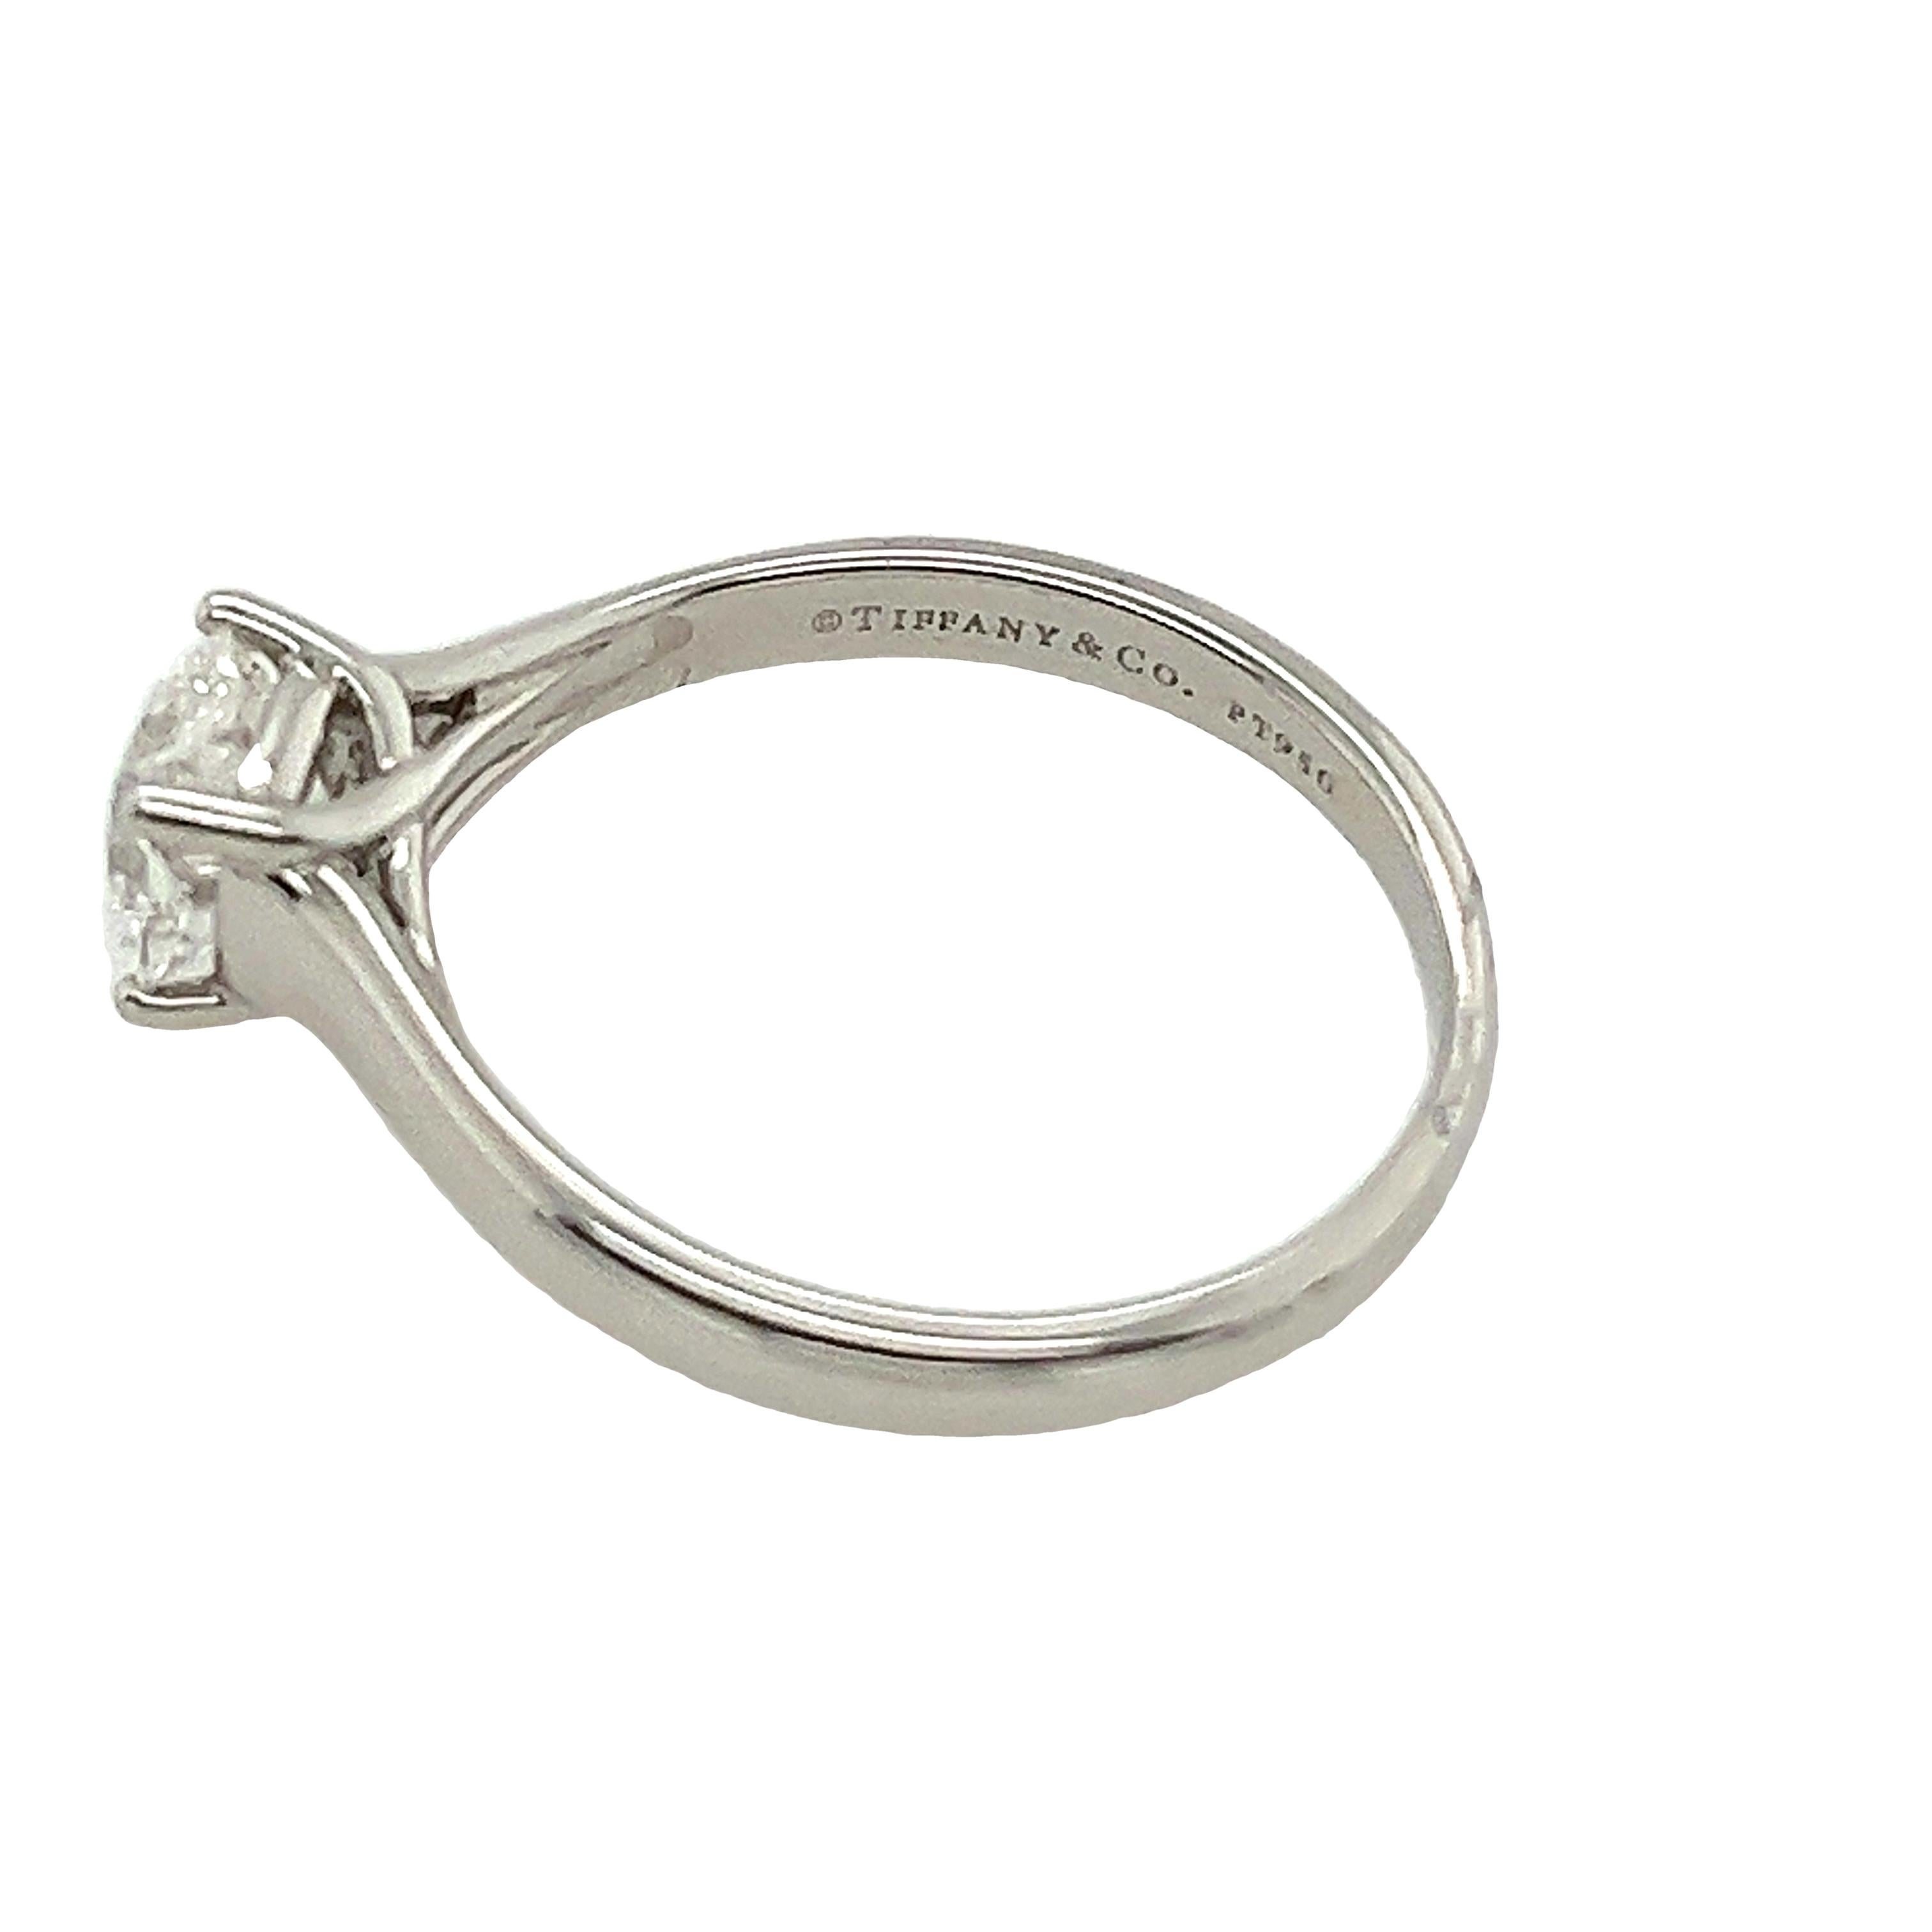 Behold the pinnacle of elegance: the Tiffany & Co. Platinum Solitaire Ring. Adorned with a magnificent 0.87-carat F/VS2 Lucida cut cornered square diamond, this masterpiece exudes timeless sophistication. Set in platinum, its classic design